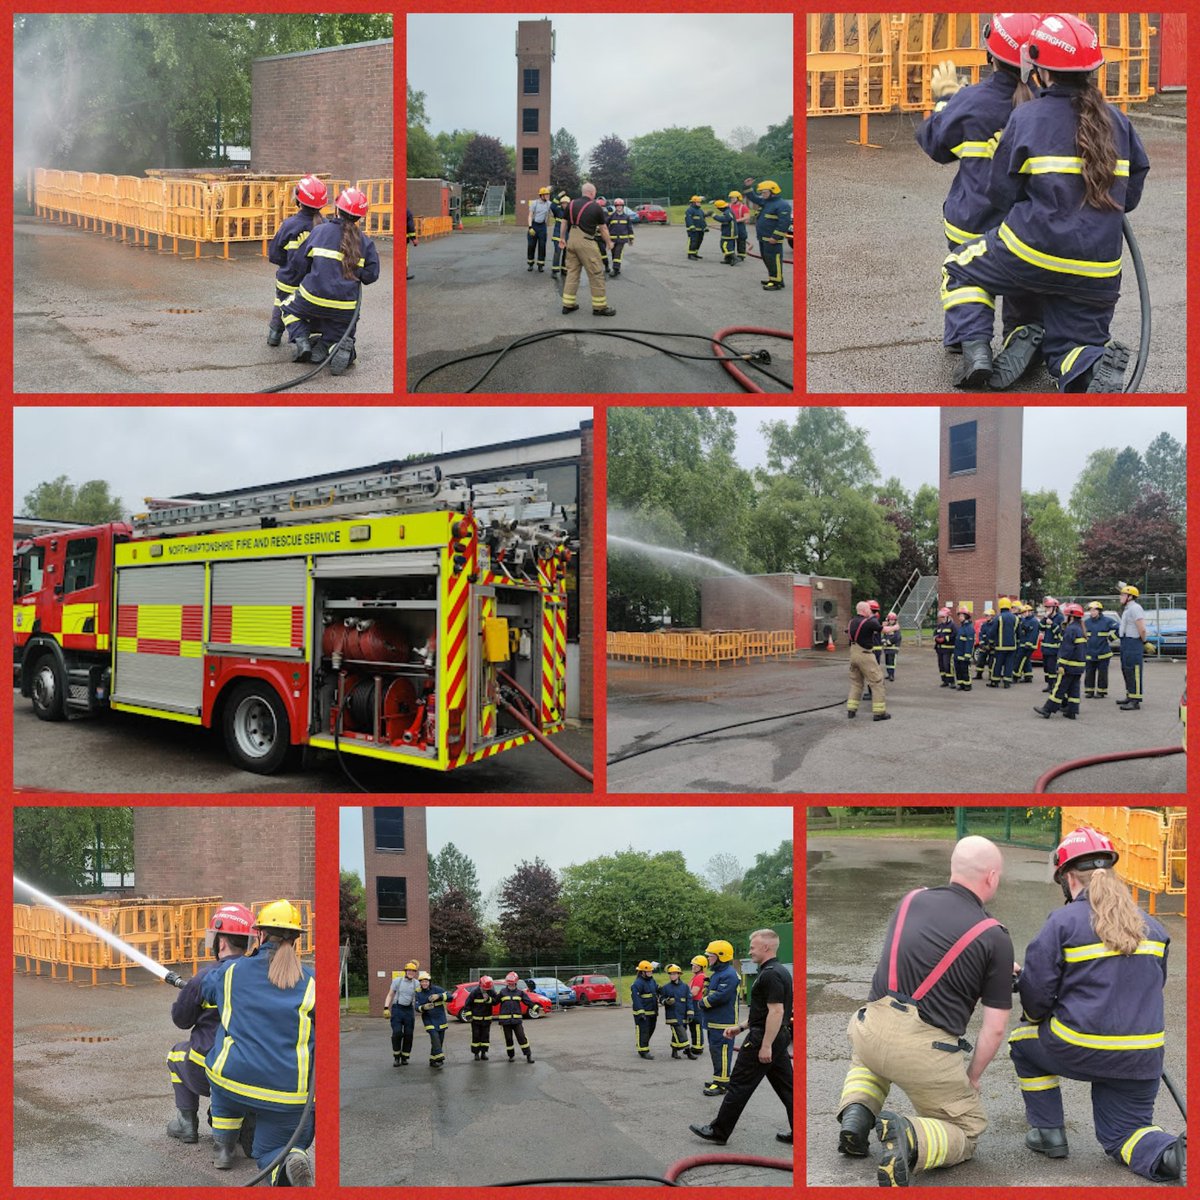 Daventry Year 1 Cadets learnt how to complete a BA Search & Rescue drill this week, incl the BA Shuffle, different branch techniques and the importance of mind mapping. Great effort from everyone, incl the Leaders 👌🧑🏻‍🚒🚒💦 @DaventryFire @northantsfire @UKFireCadets @ESCadets